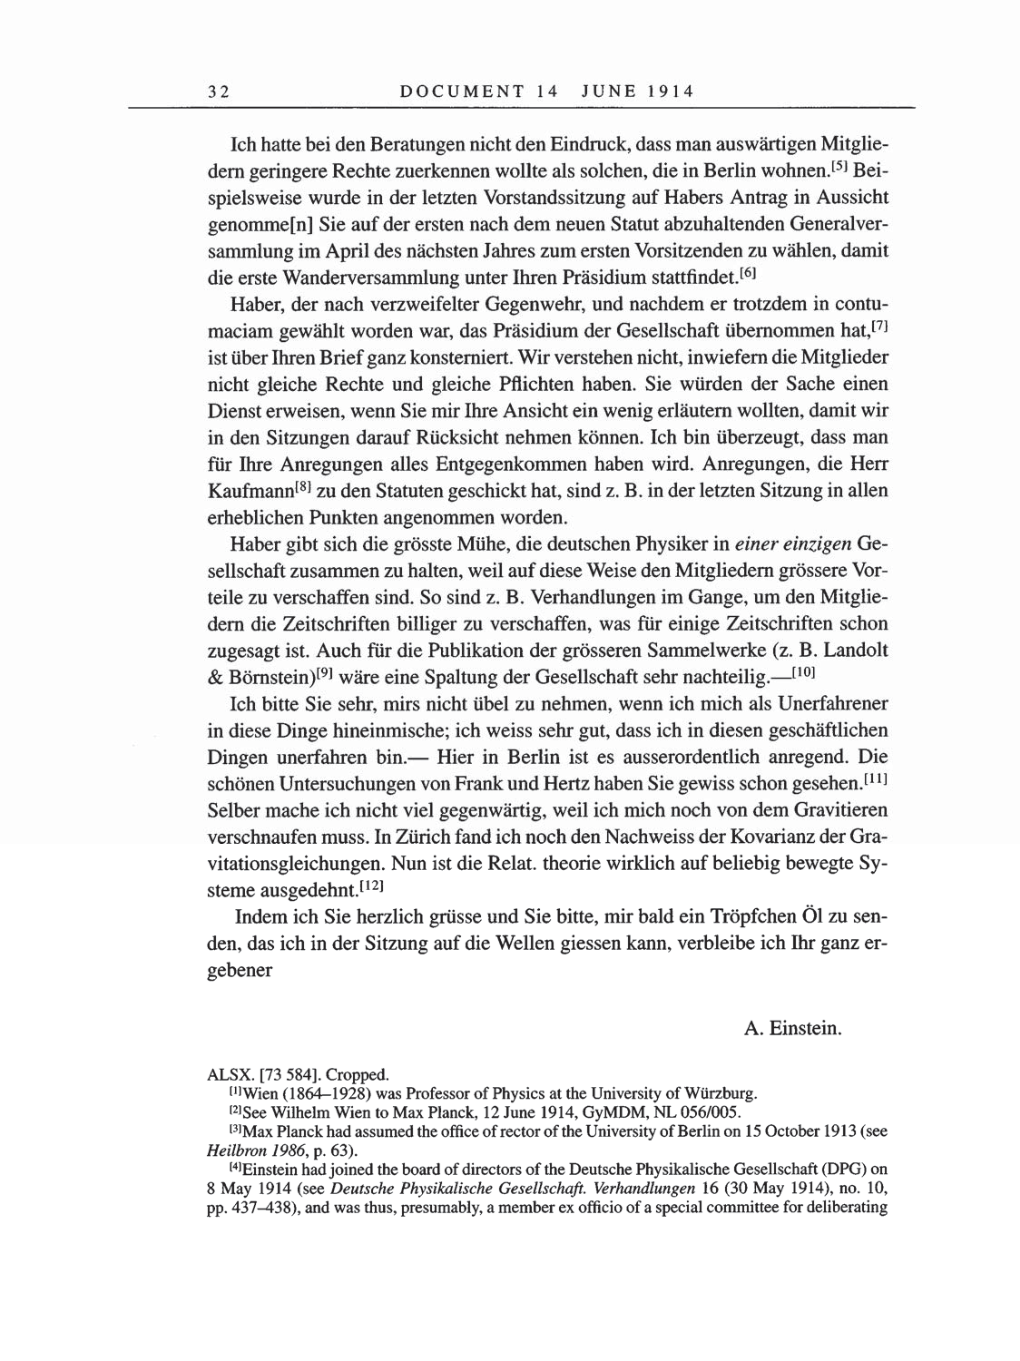 Volume 8, Part A: The Berlin Years: Correspondence 1914-1917 page 32